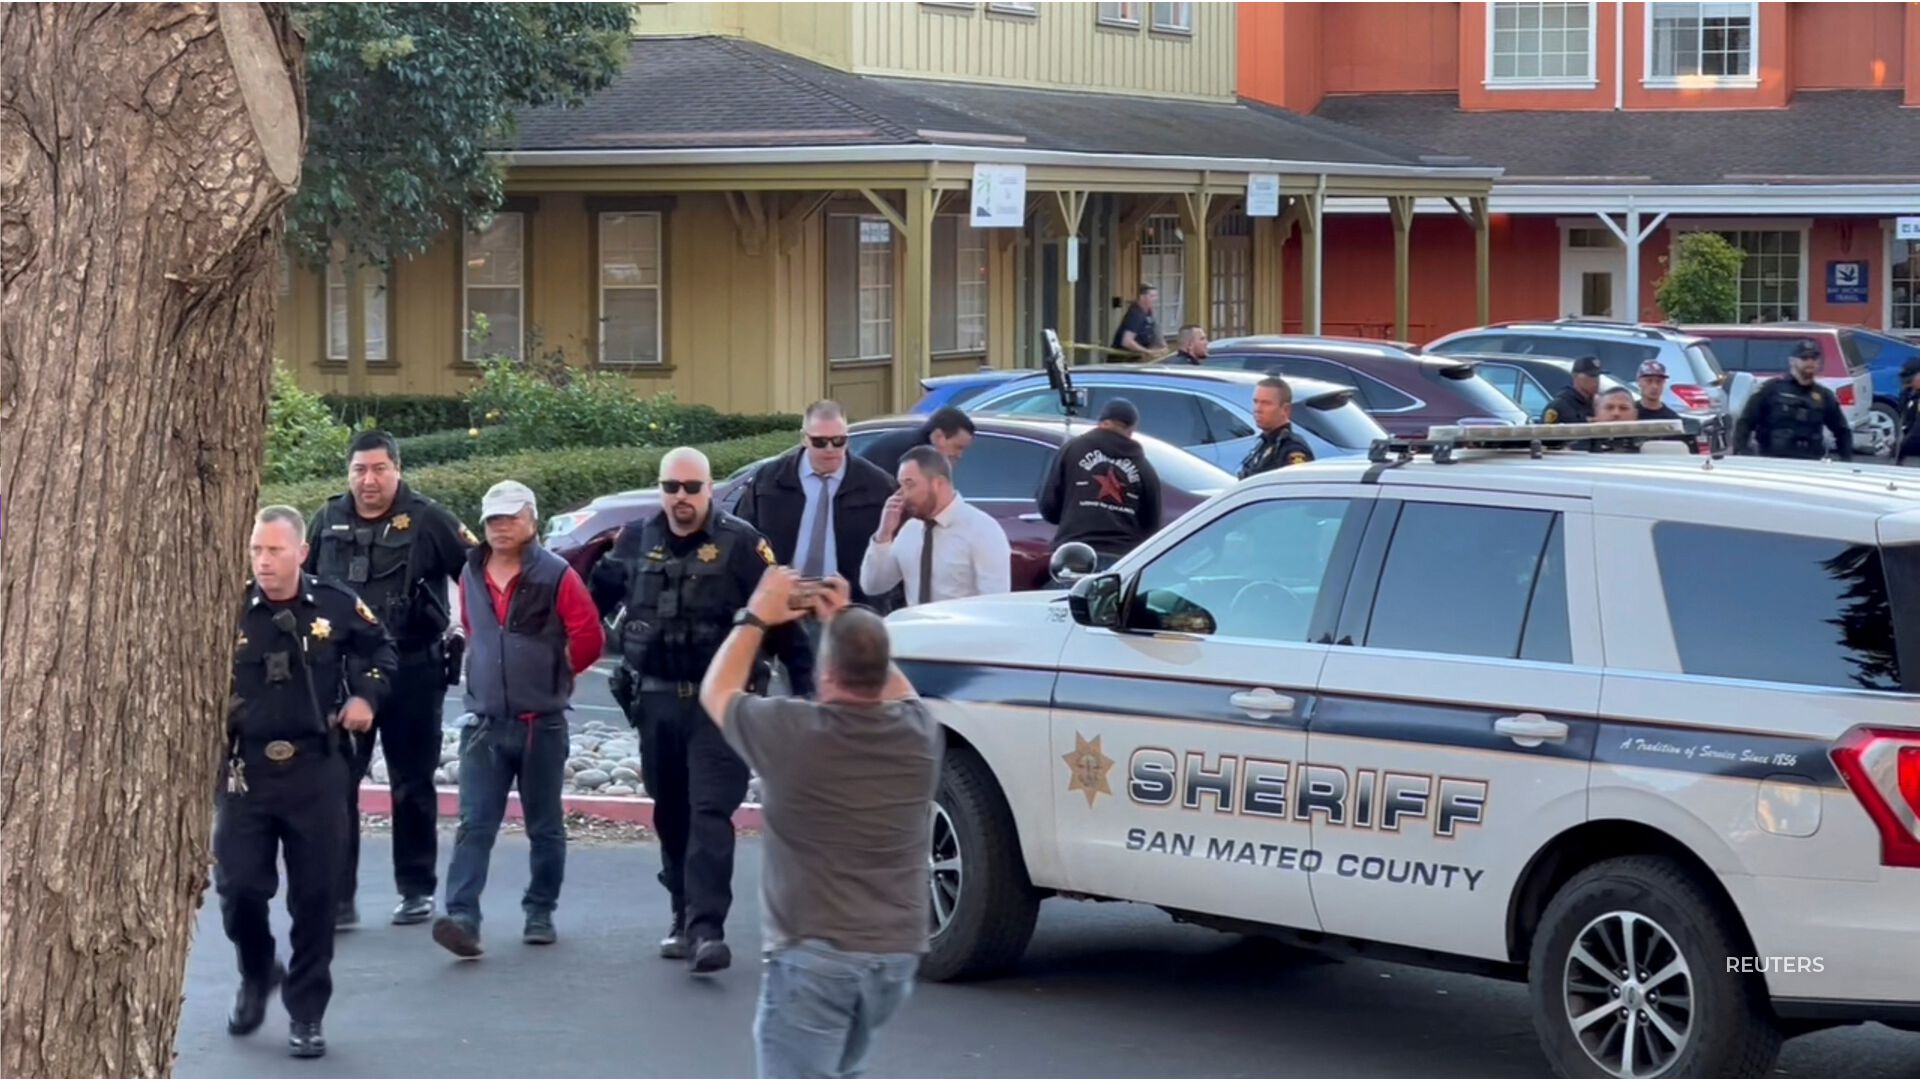 At least seven people were killed Monday in Half Moon Bay, California. The shootings took place at two mushroom farms. The shooter had reportedly worked at one of them.